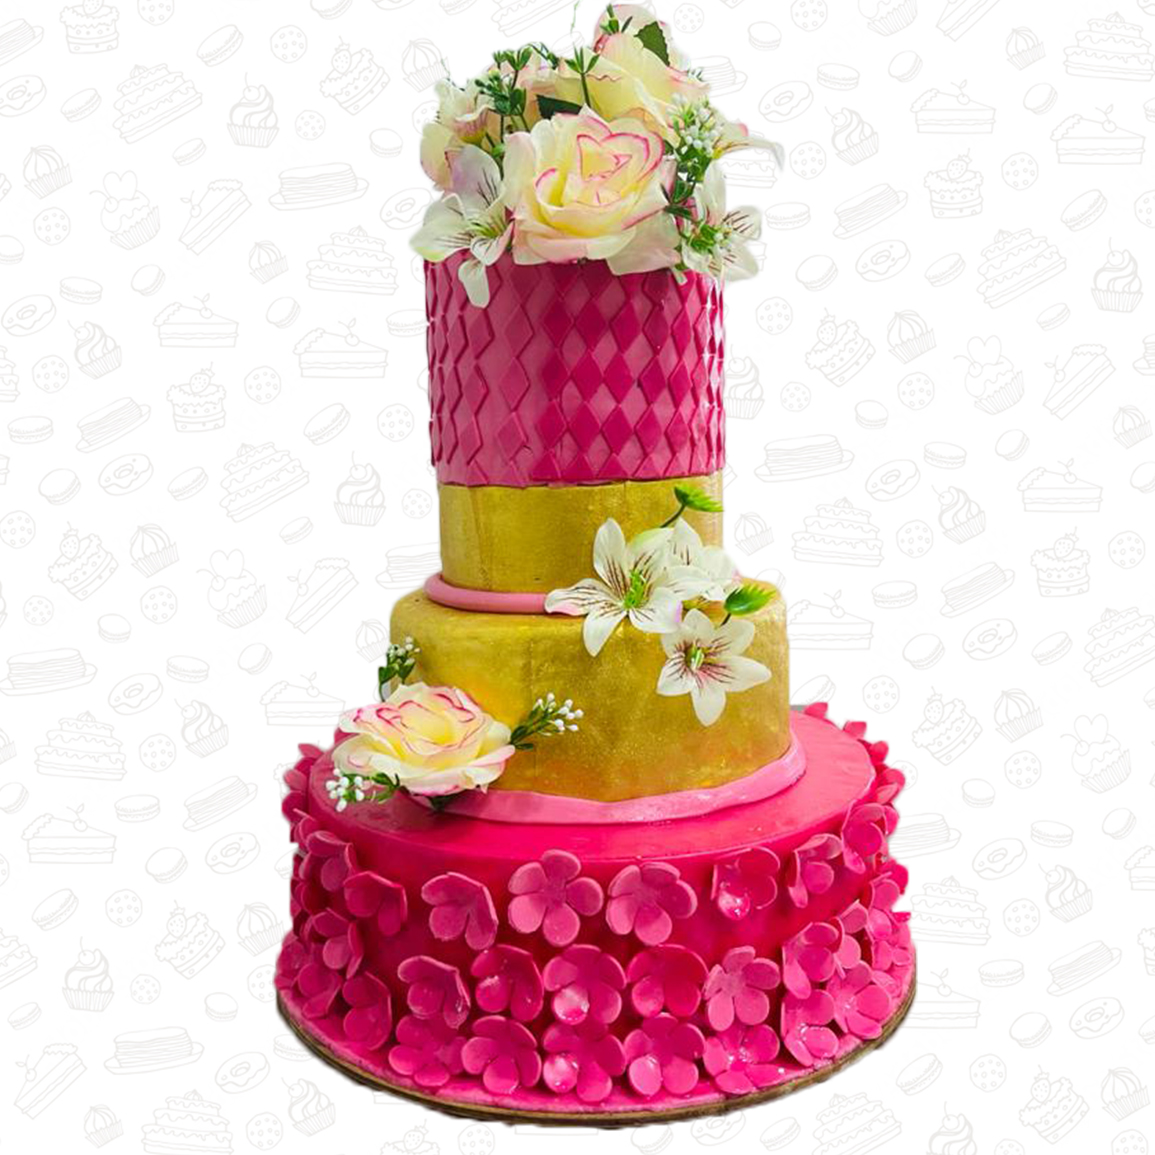 Easter Special Pink Floral Cake with Topper - Ovenfresh